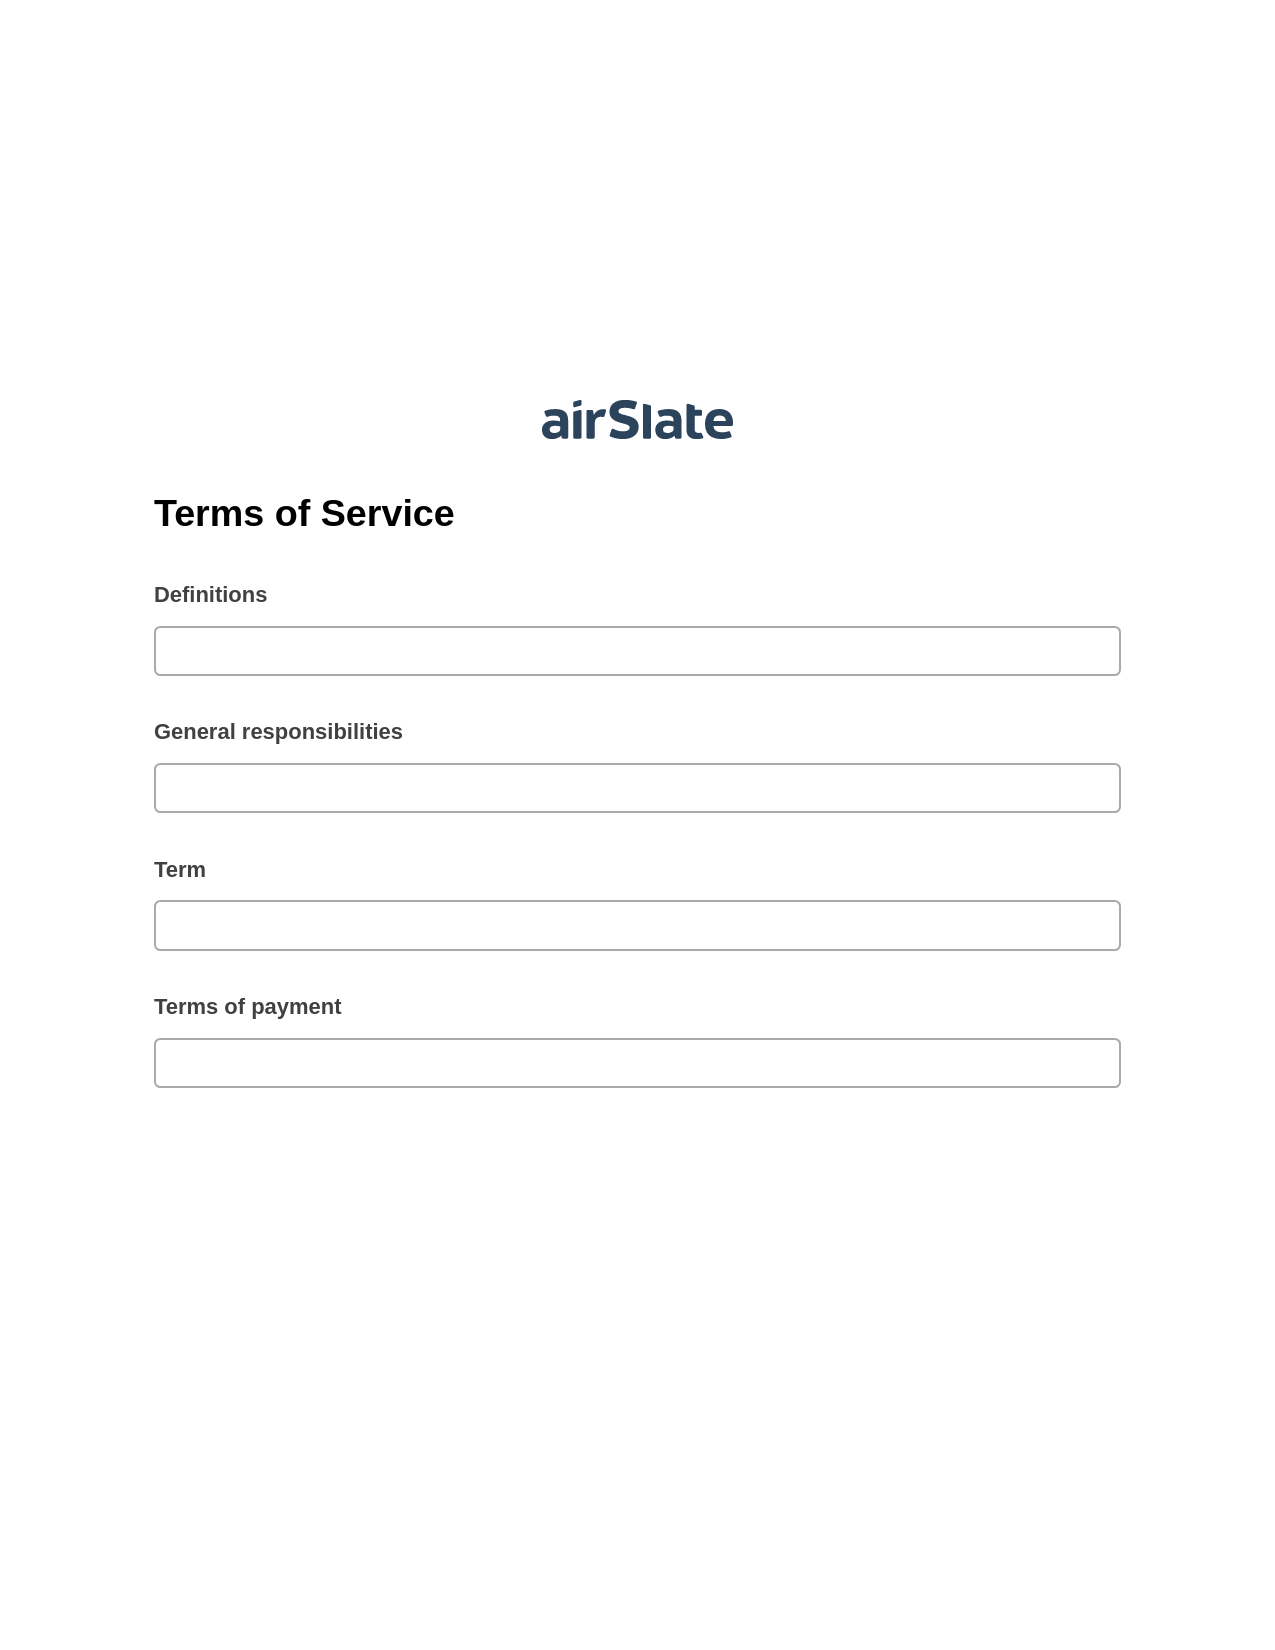 Terms of Service Pre-fill from MySQL Bot, System Bot - Create a Slate in another Flow, Dropbox Bot